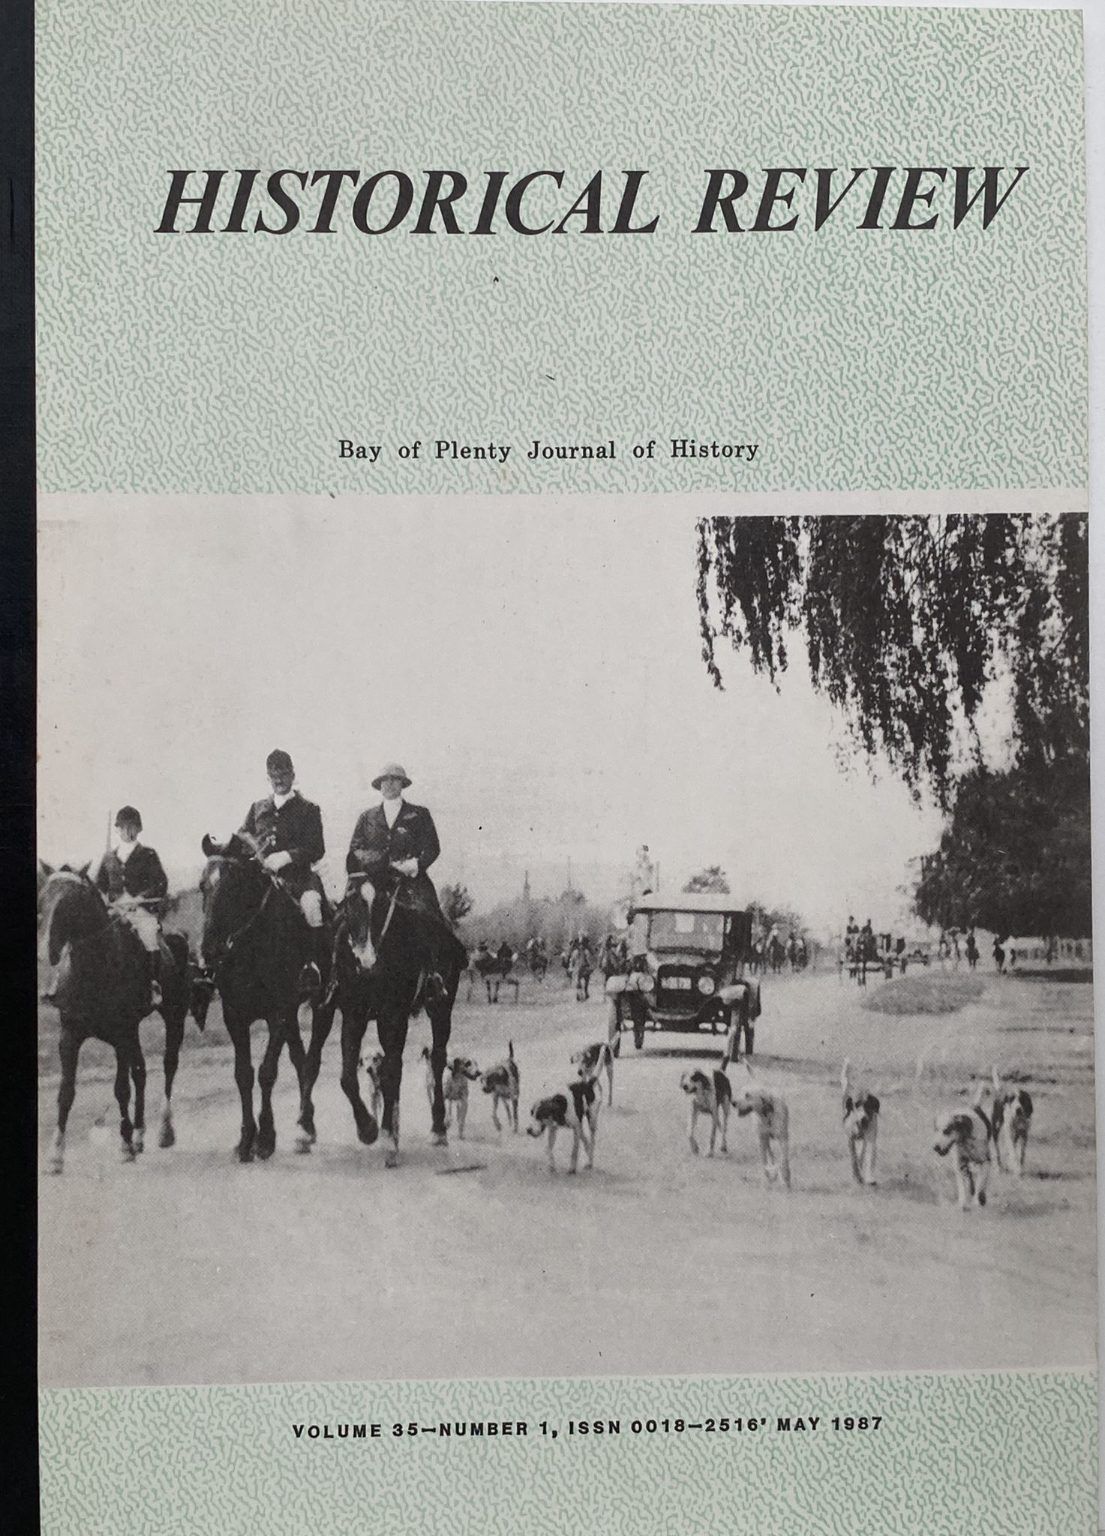 HISTORICAL REVIEW: Bay of Plenty Journal of History - Volume 35, No.1 - May 1997